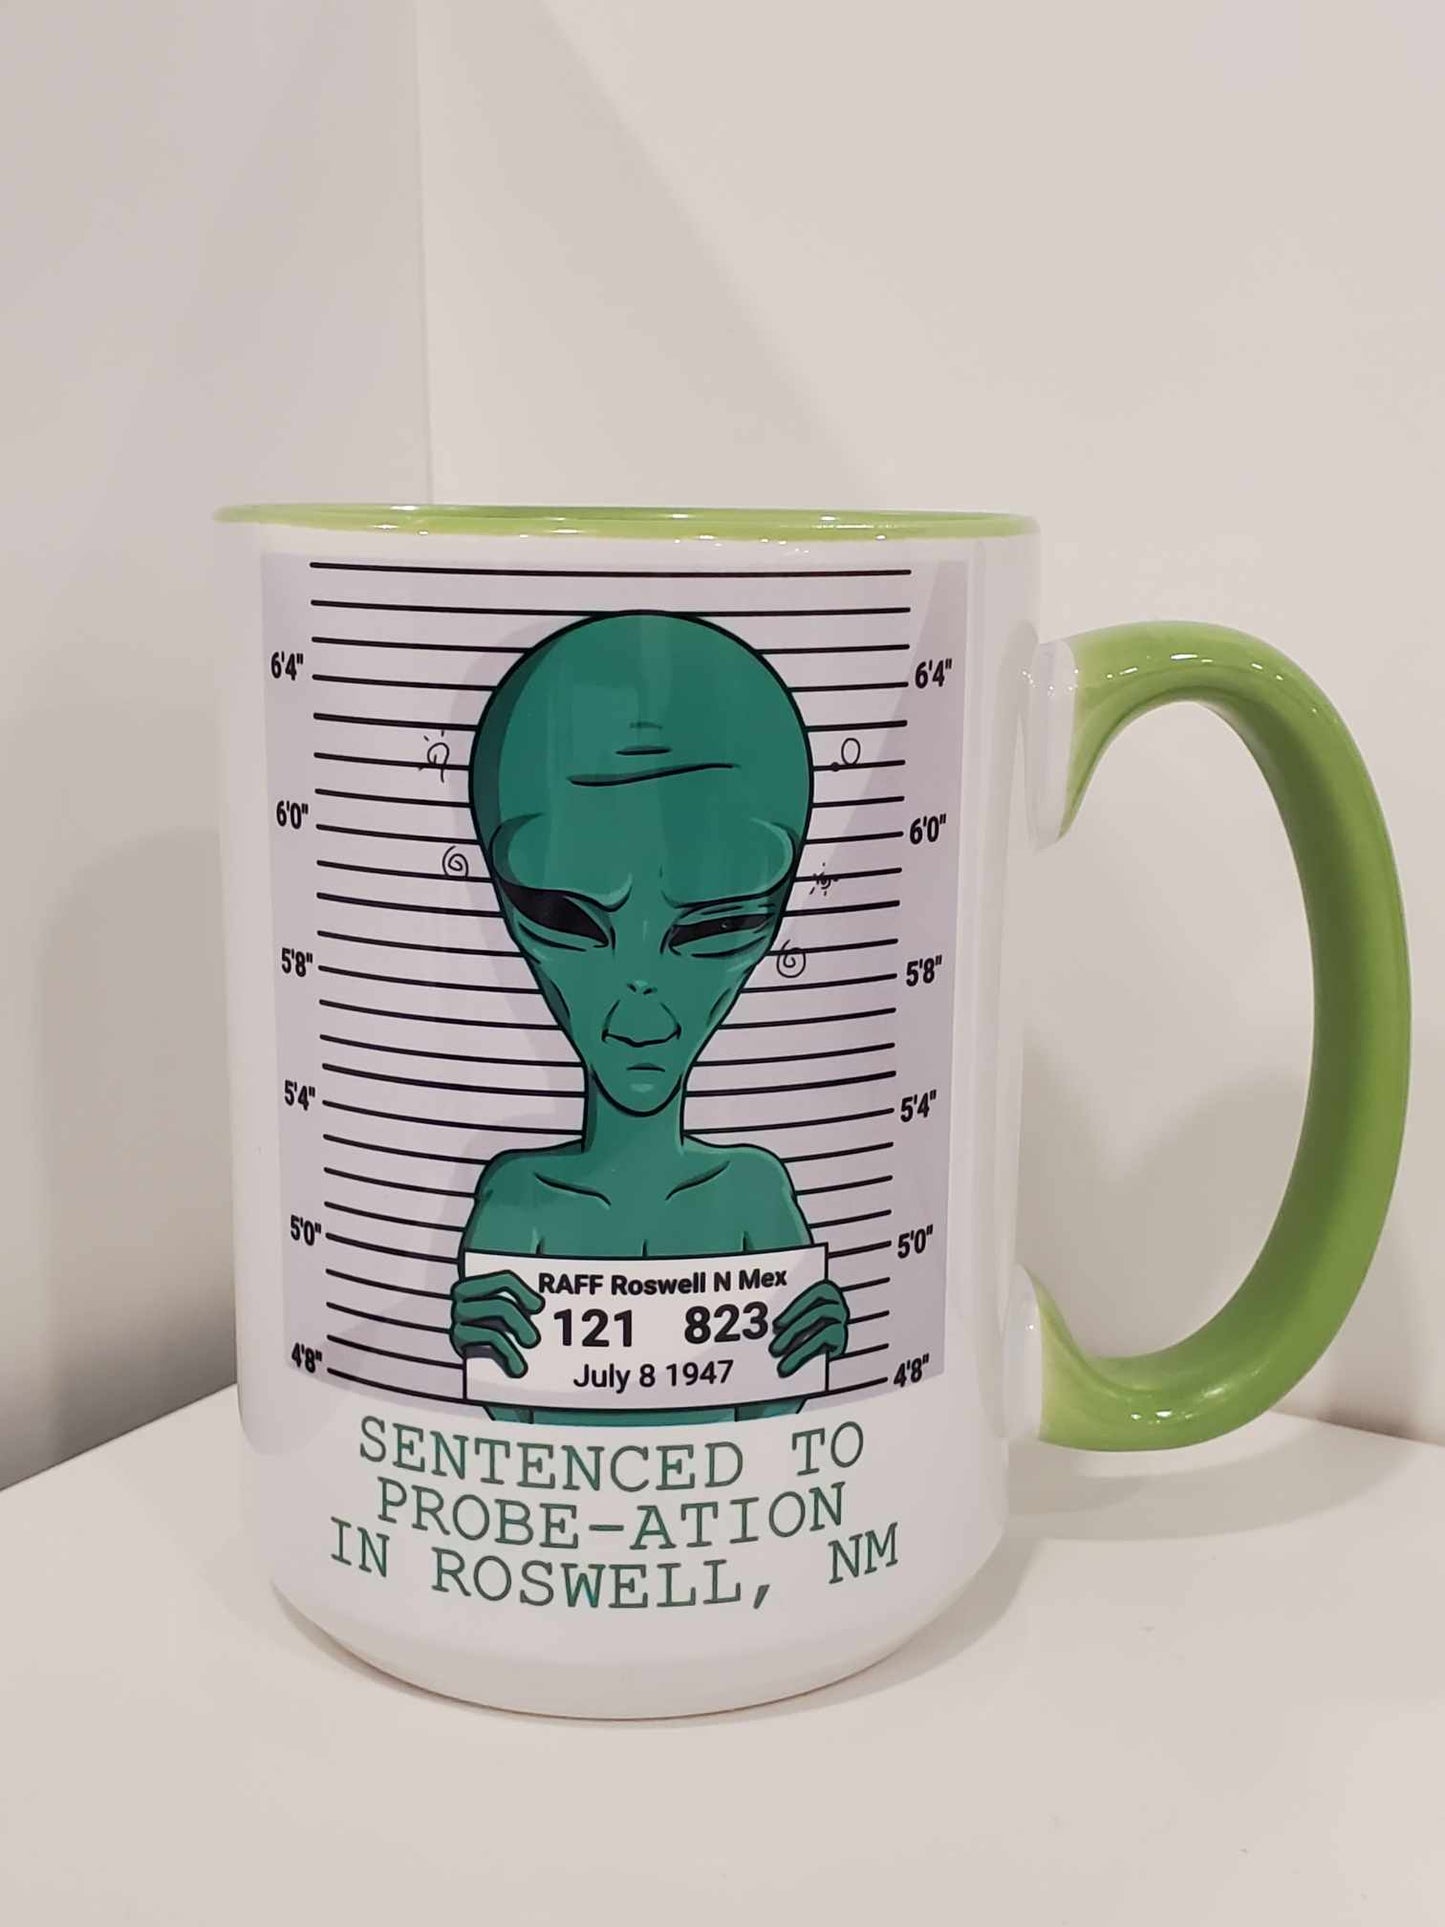 Sentenced to Probe-Ation, Flying While Intoxicated 15oz Coffee Mug Green